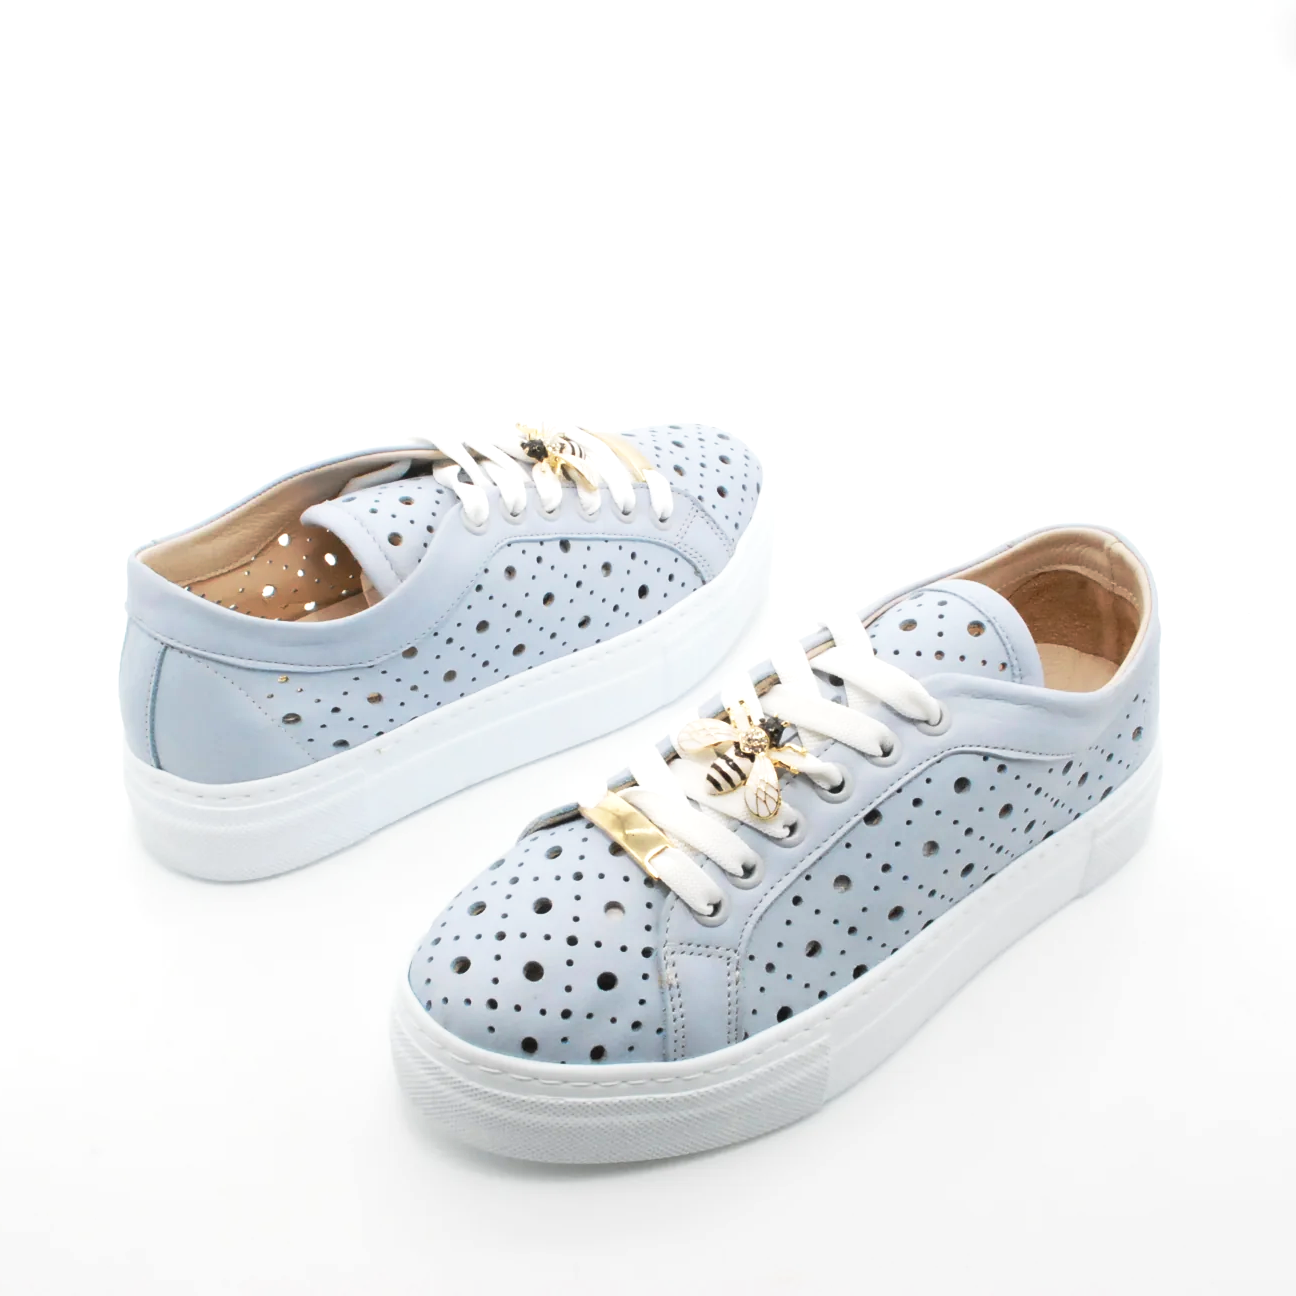 sneakers-wave-in-pelle-sneakers-2_ae7b07dc-6d00-4613-b48e-7c3997a83e8d.png